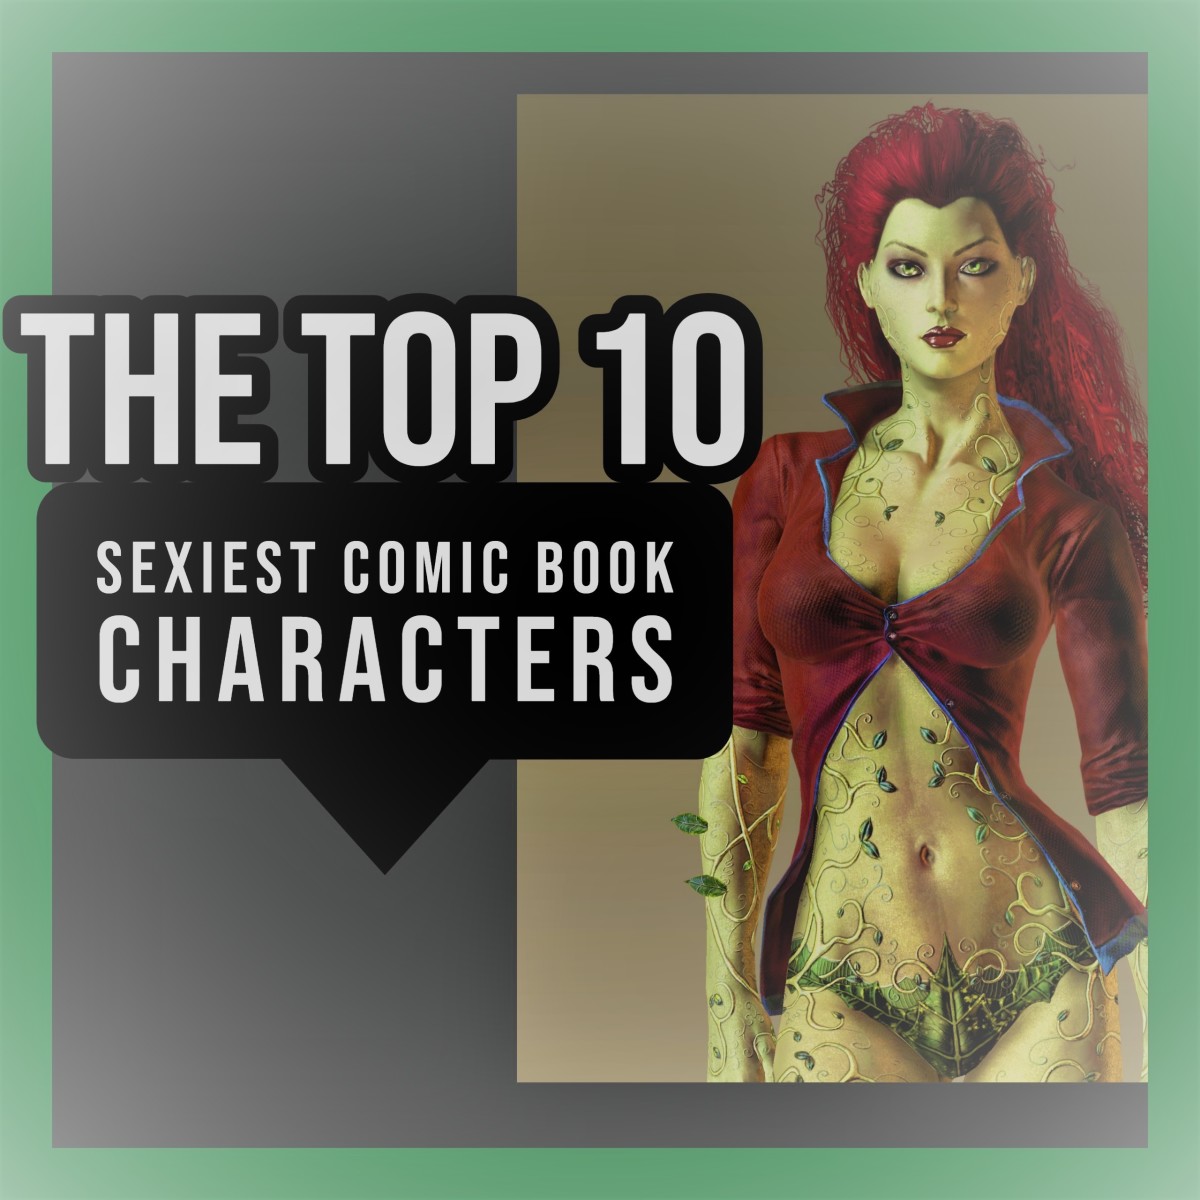 From the beautiful Mystique to the gorgeous Wonder Woman, this article ranks the 10 sexiest comic book characters of all time.